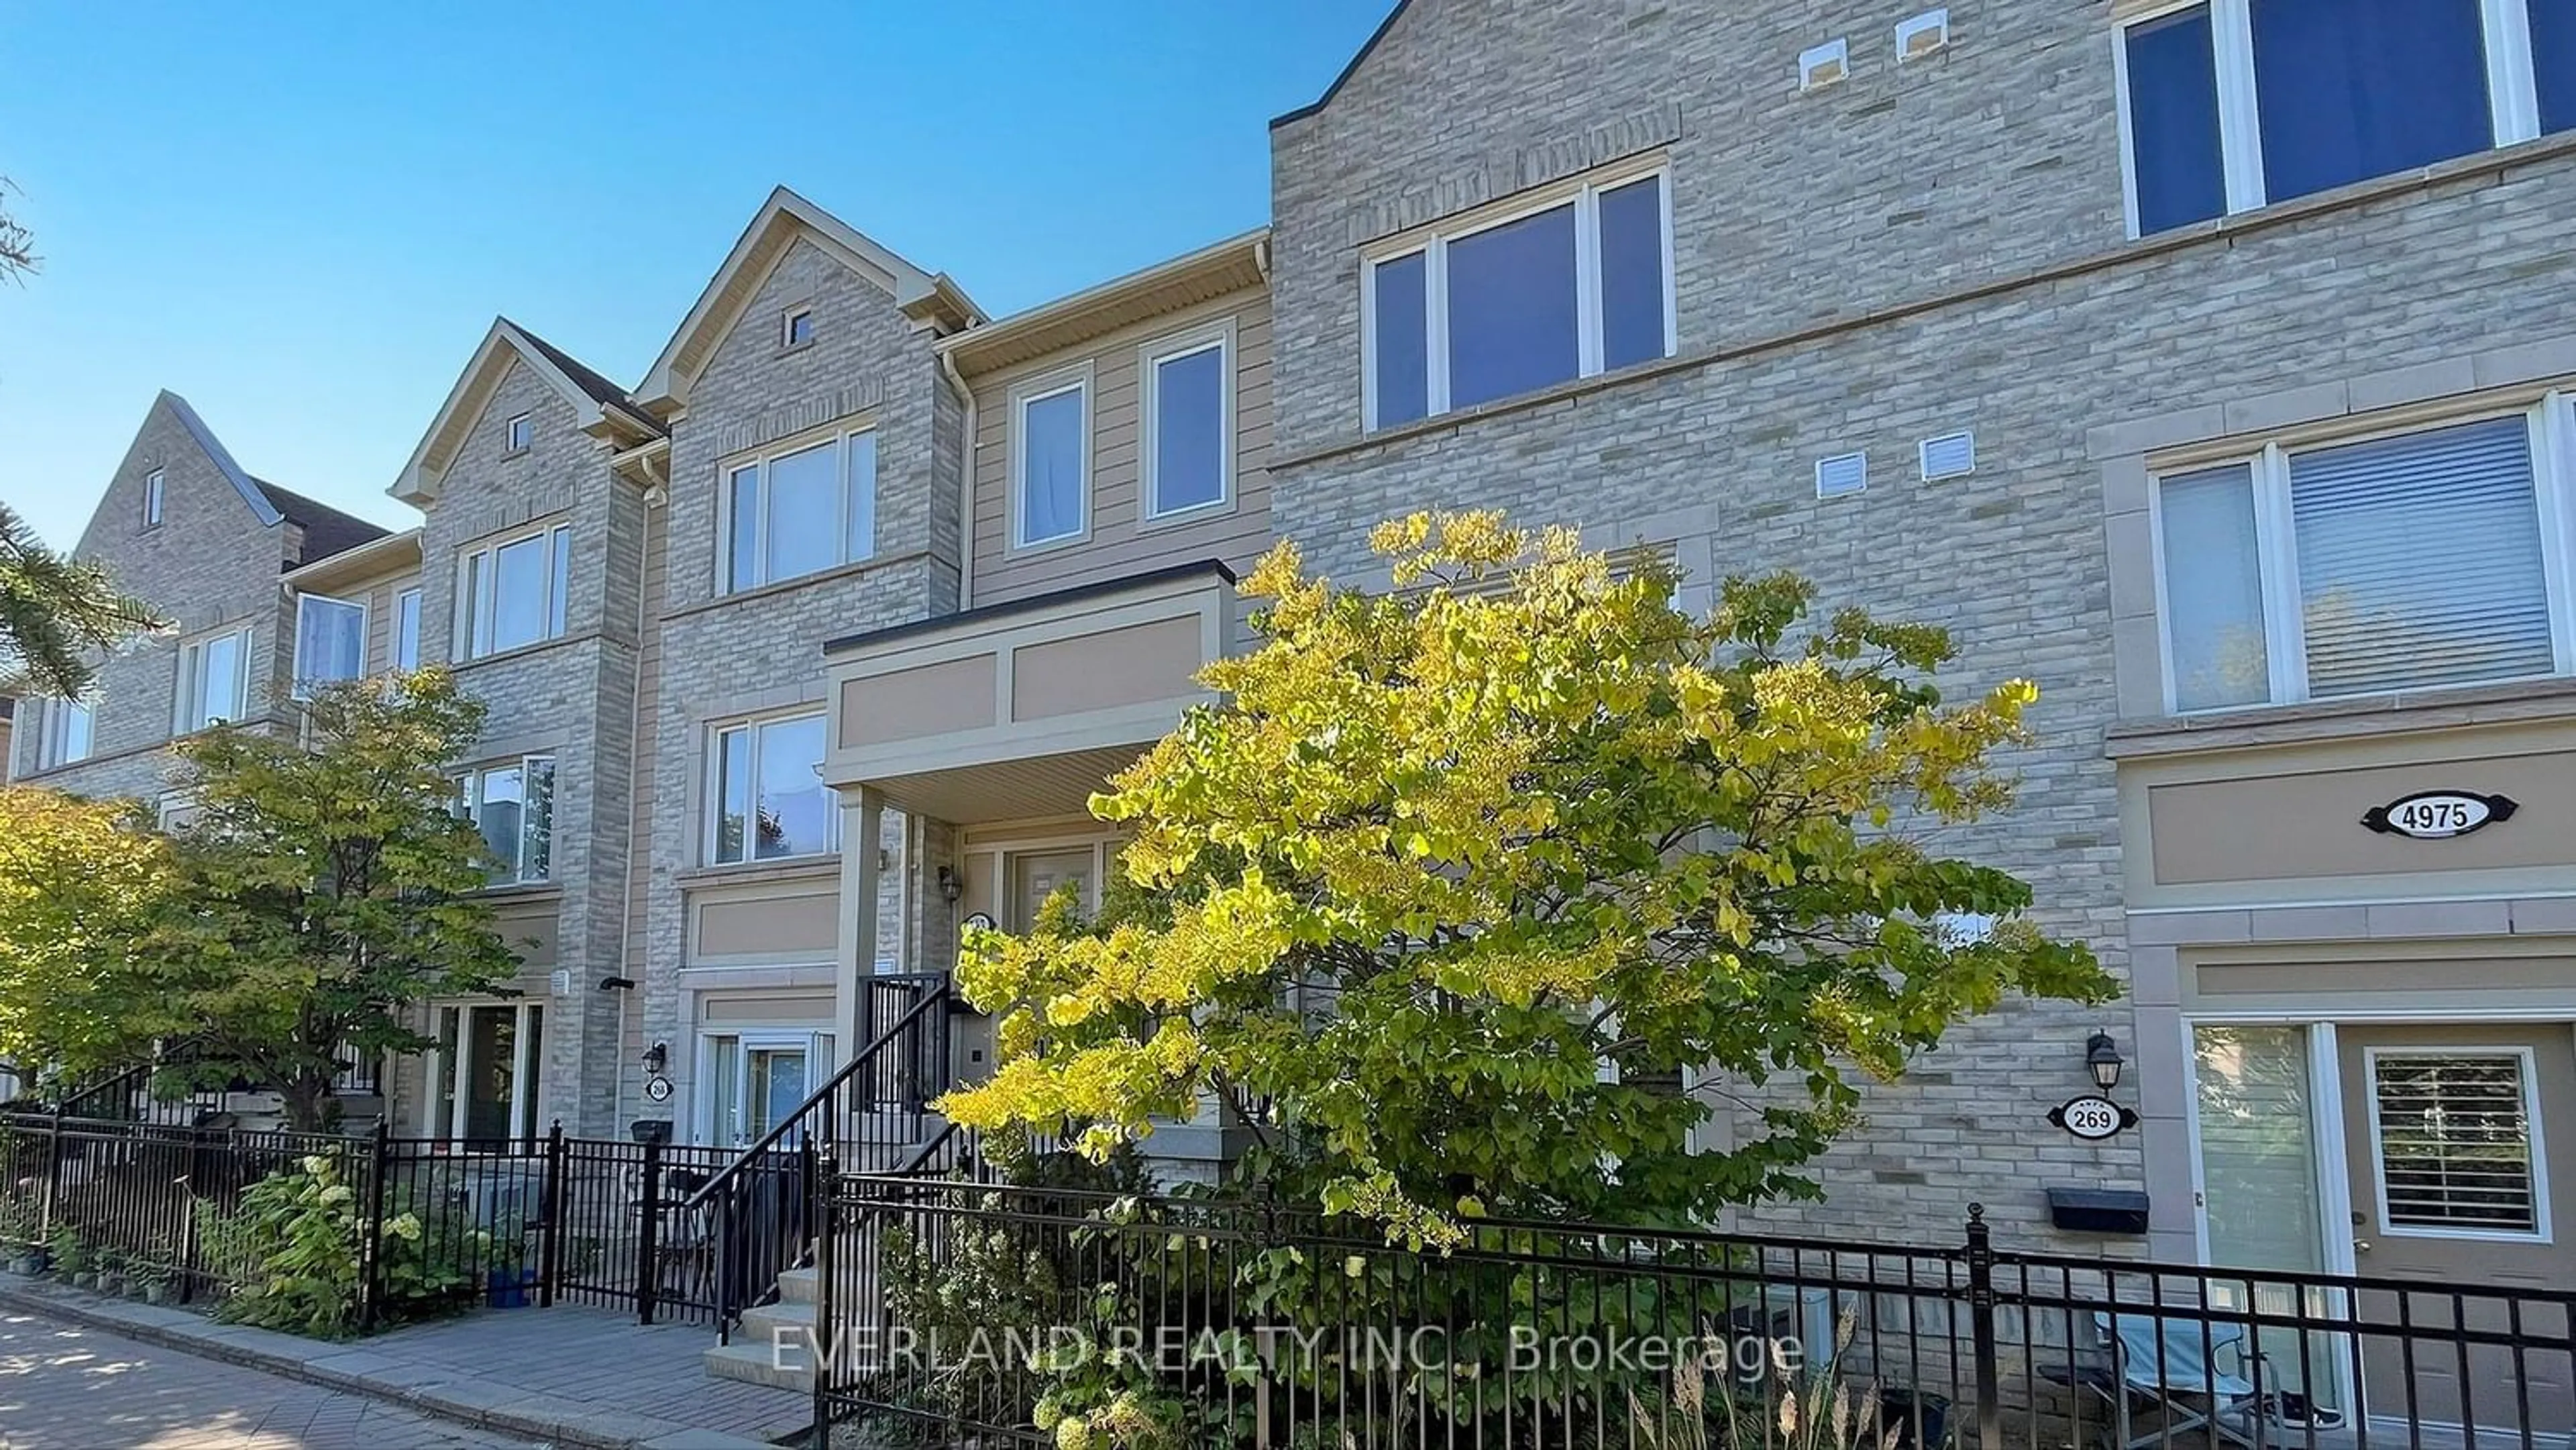 A pic from exterior of the house or condo for 4975 Southampton Dr #268, Mississauga Ontario L5M 8E3